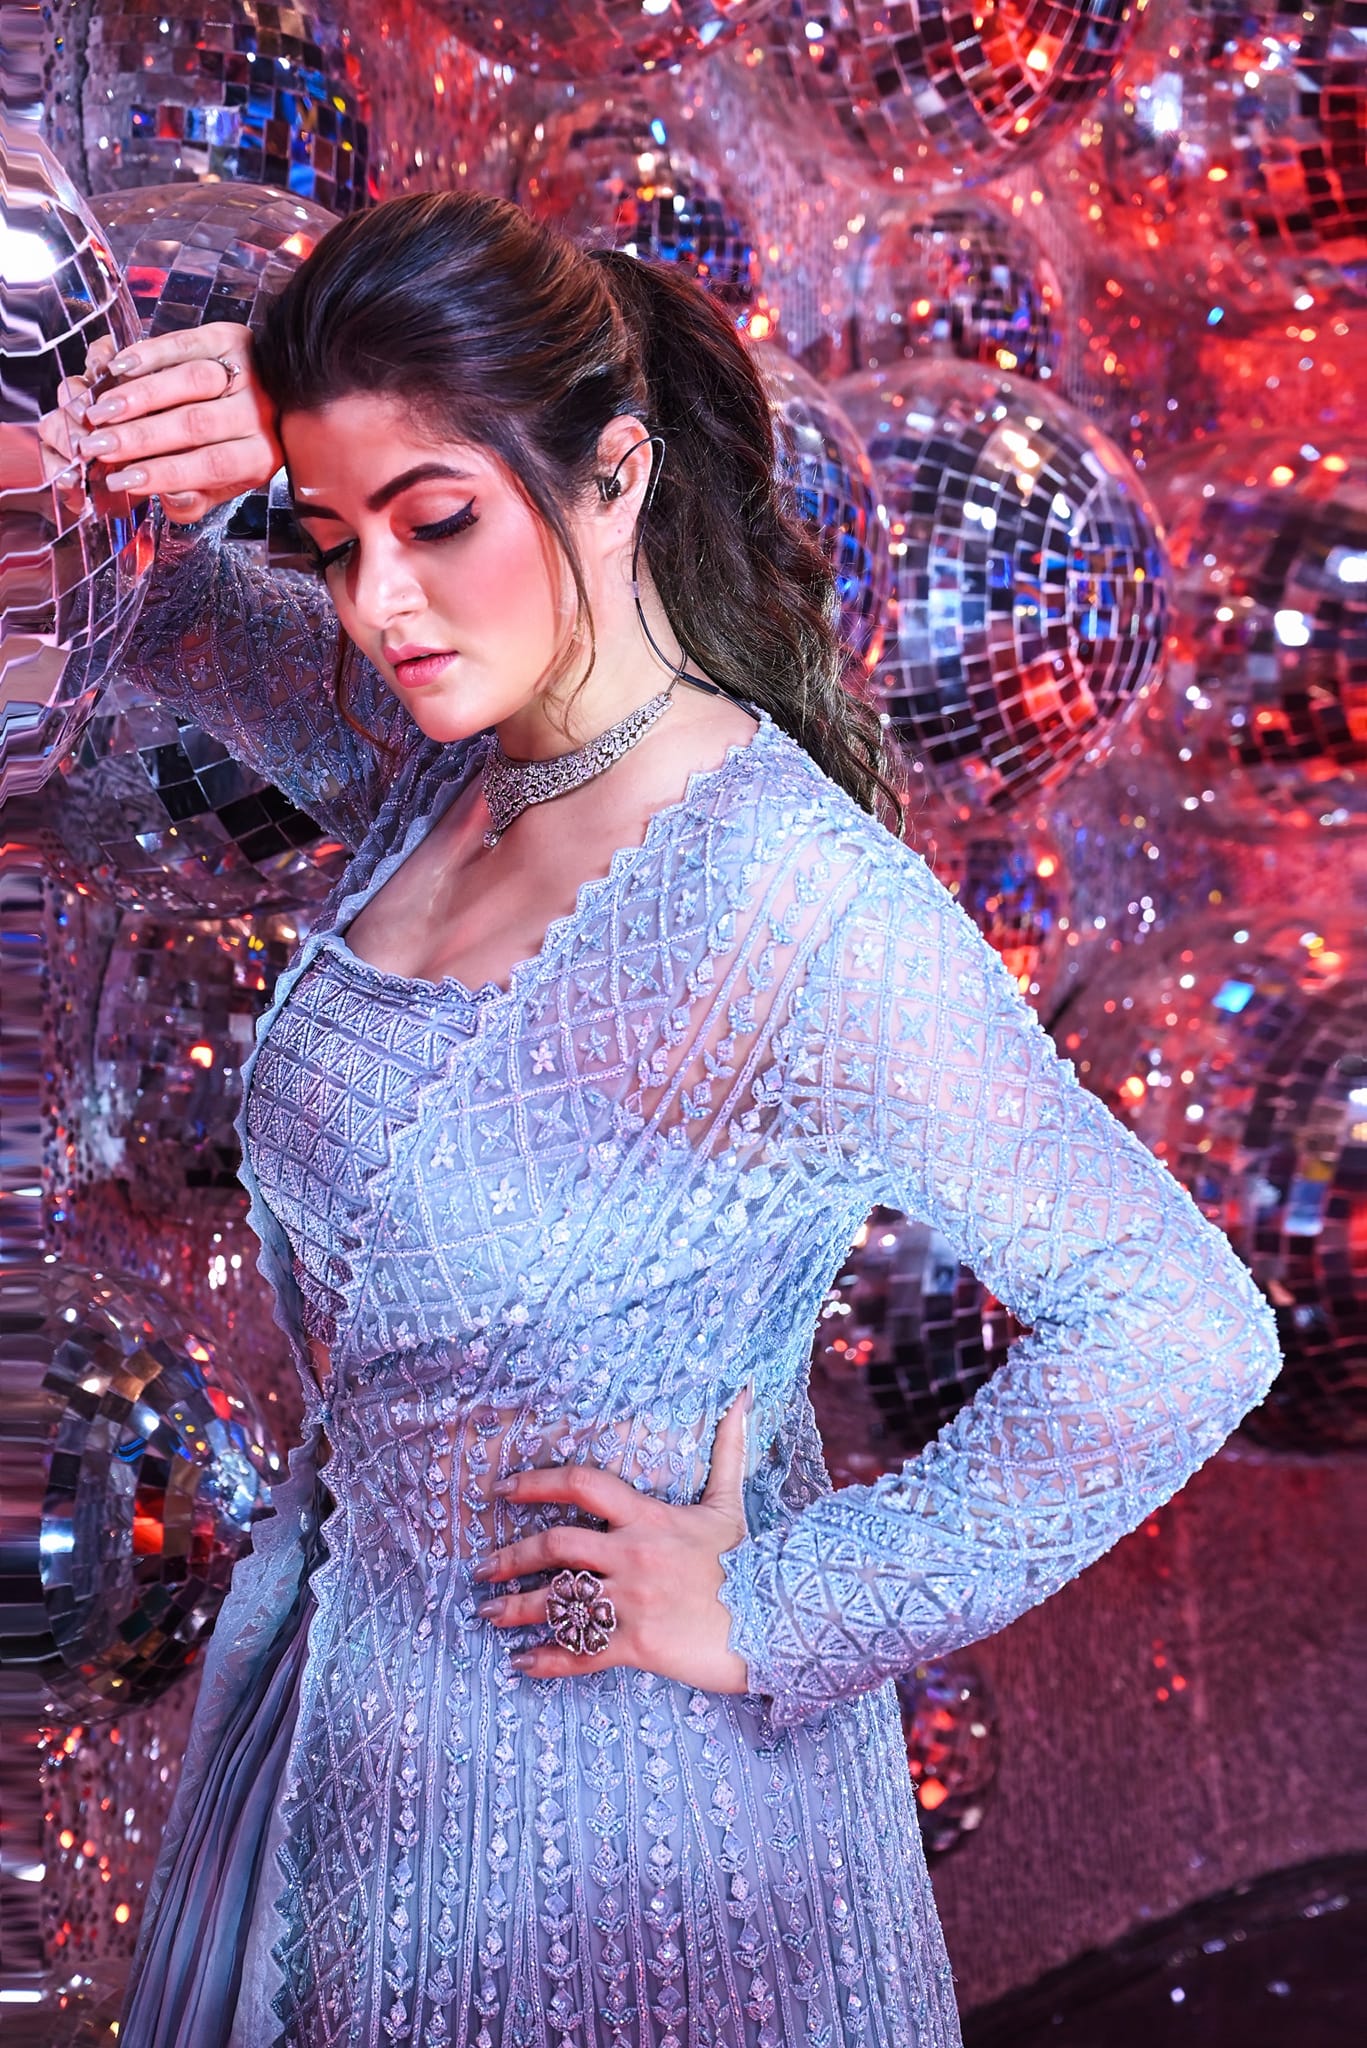 Srabanti-Chatterjee-shares-some-glam-and-stunning-photos-See-the-pictures-02-Bengalplanet.com